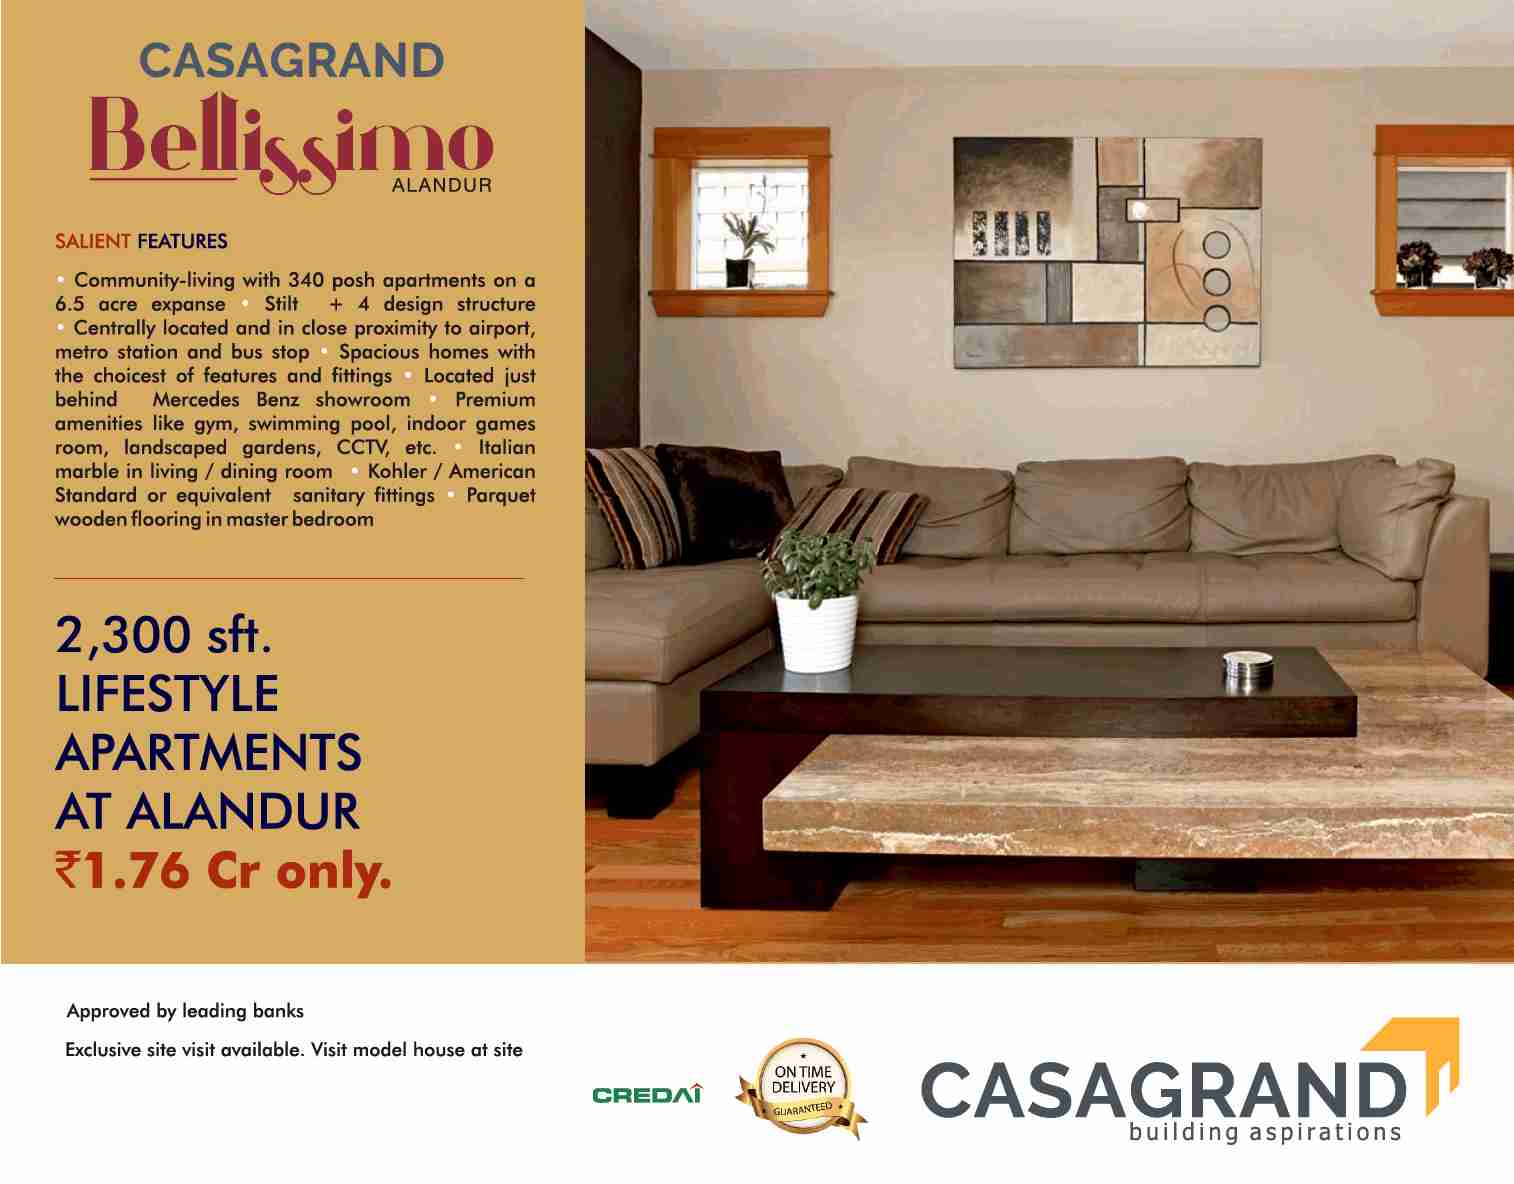 Book lifestyle apartments at Rs. 1.76 cr at Casagrand Bellissimo in Chennai Update